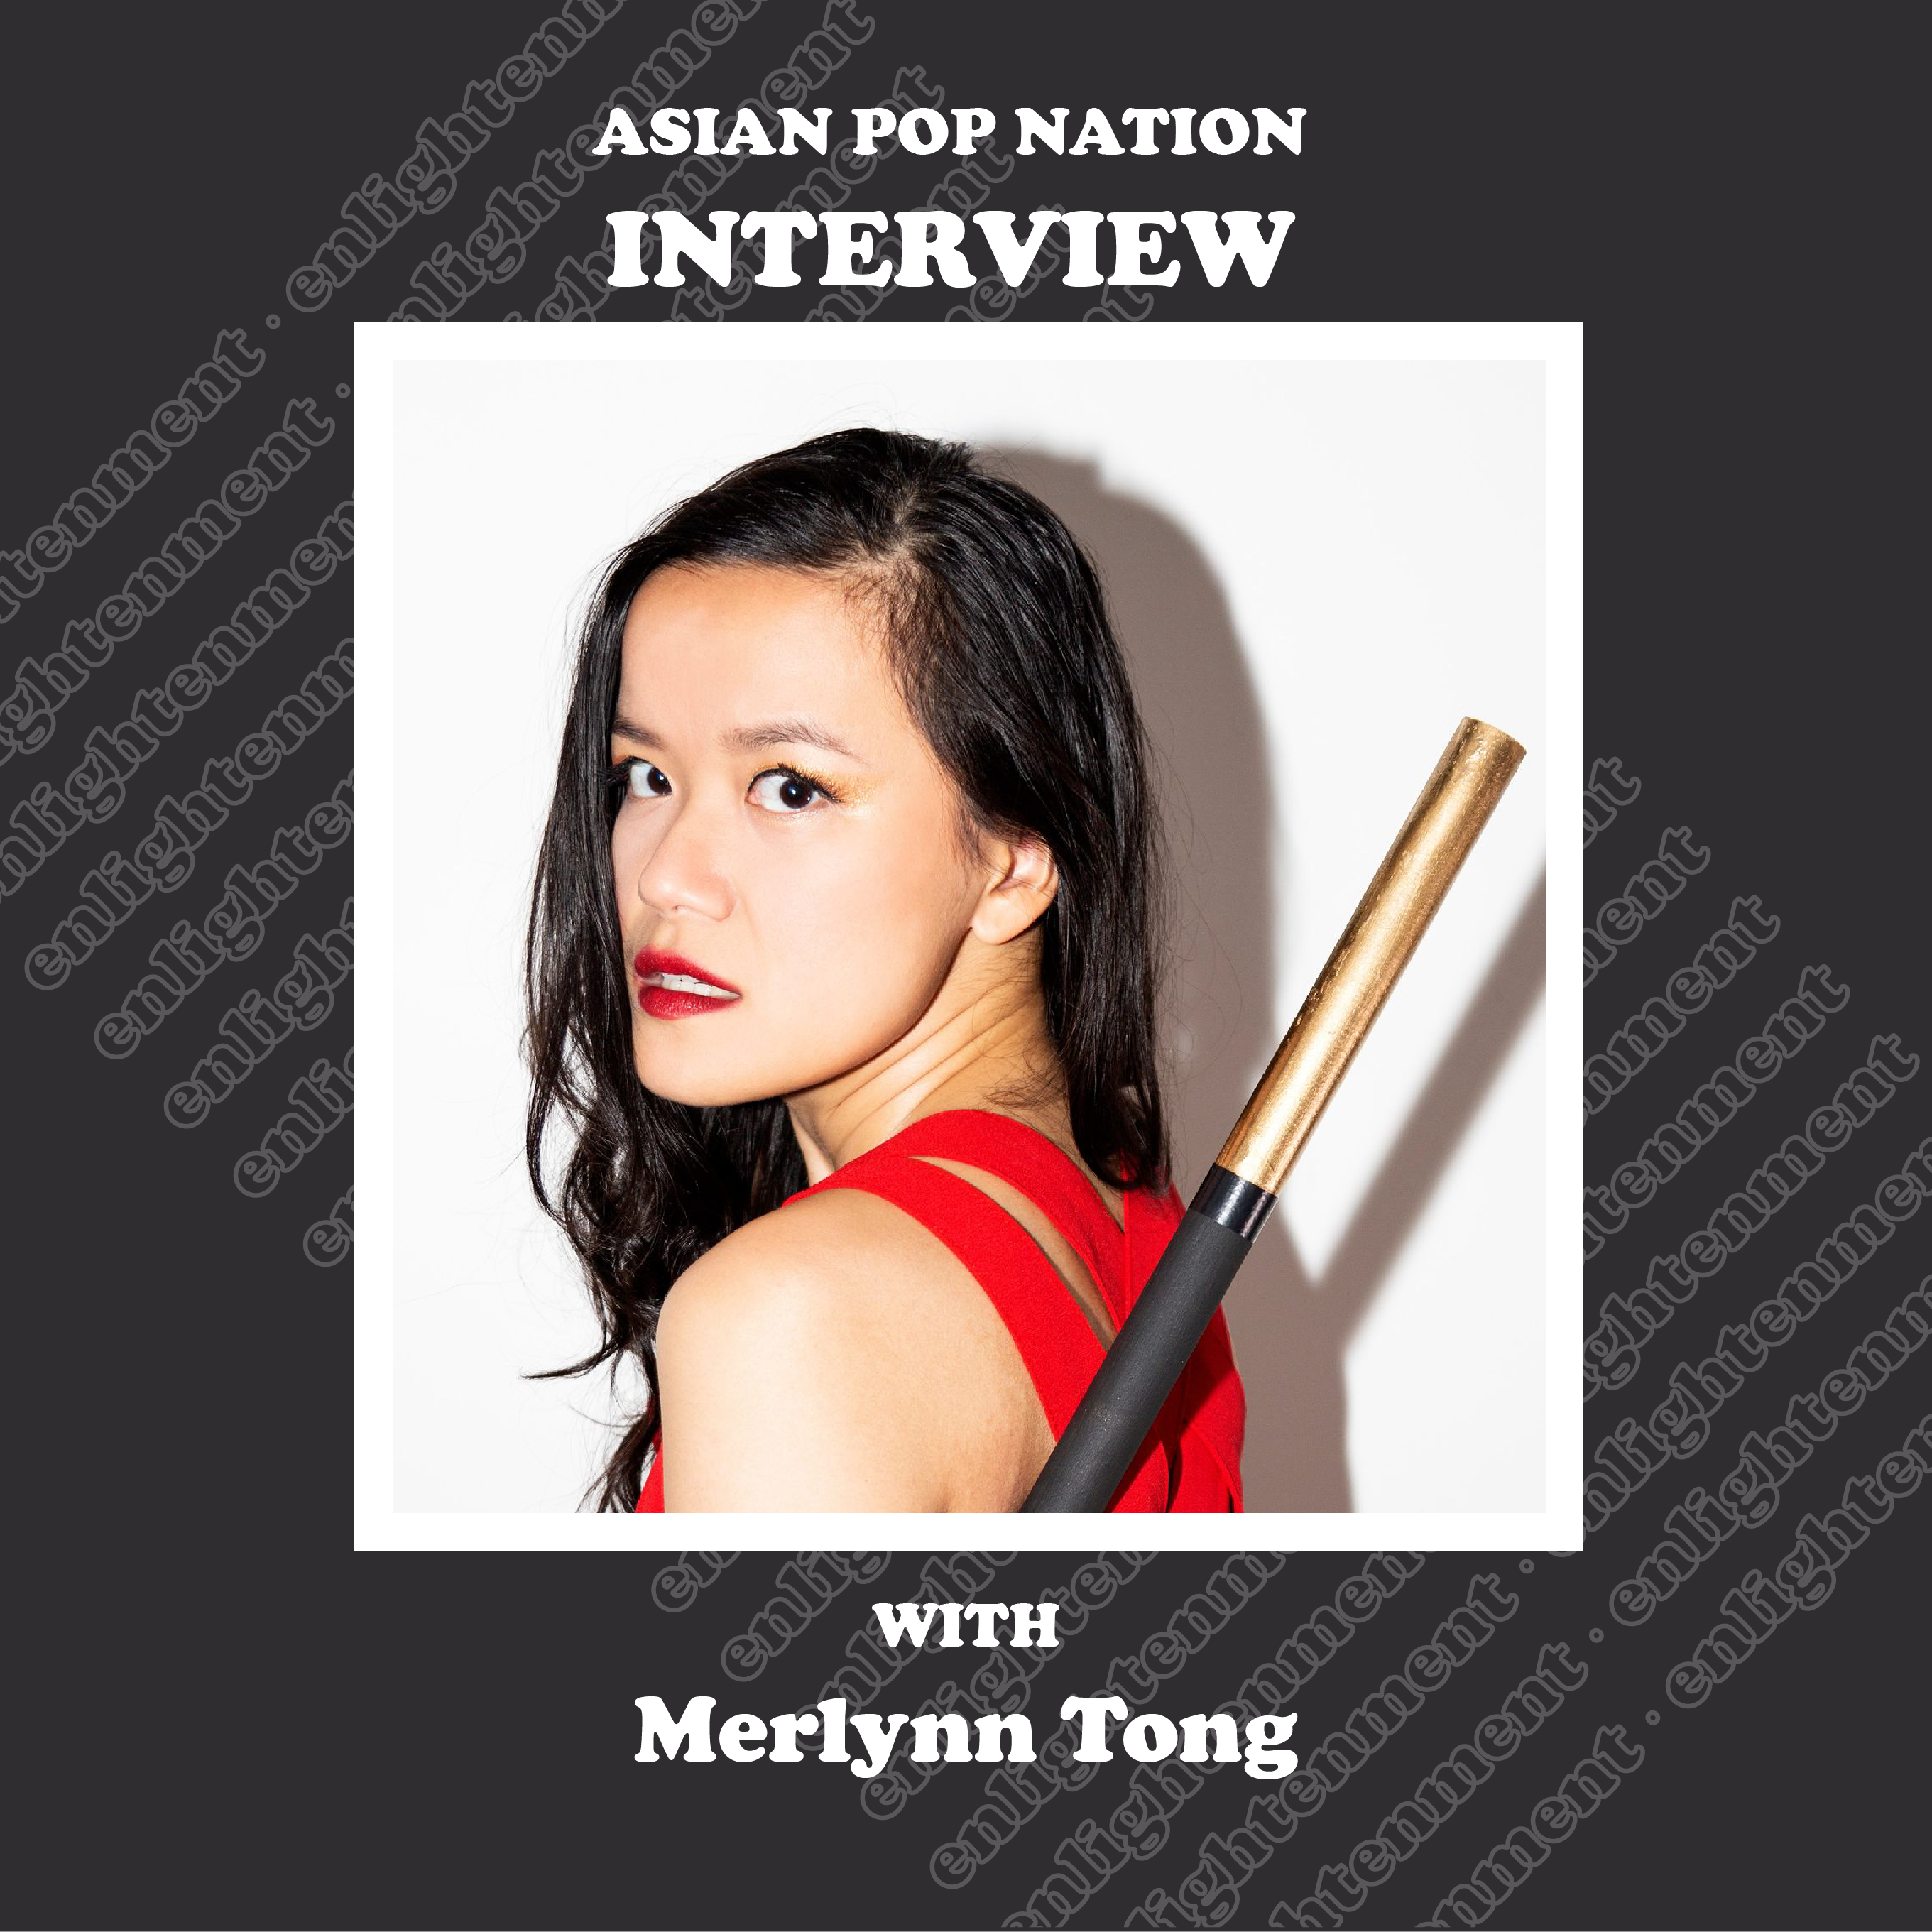 APN's Interview with Merlynn Tong